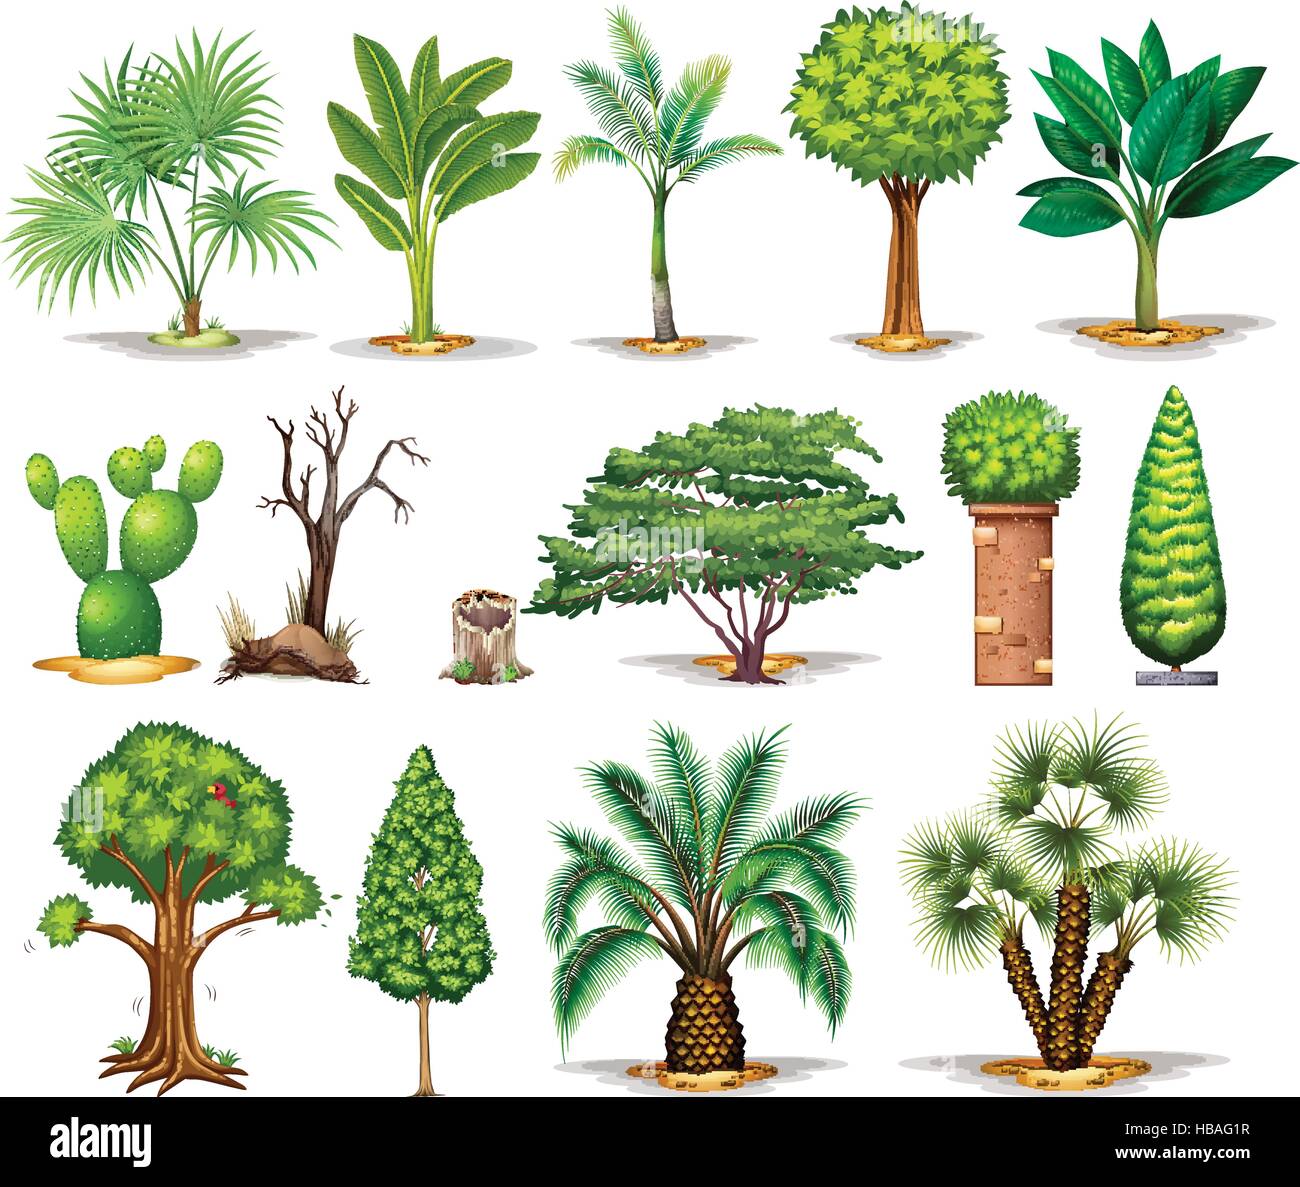 Different types of trees illustration Stock Vector